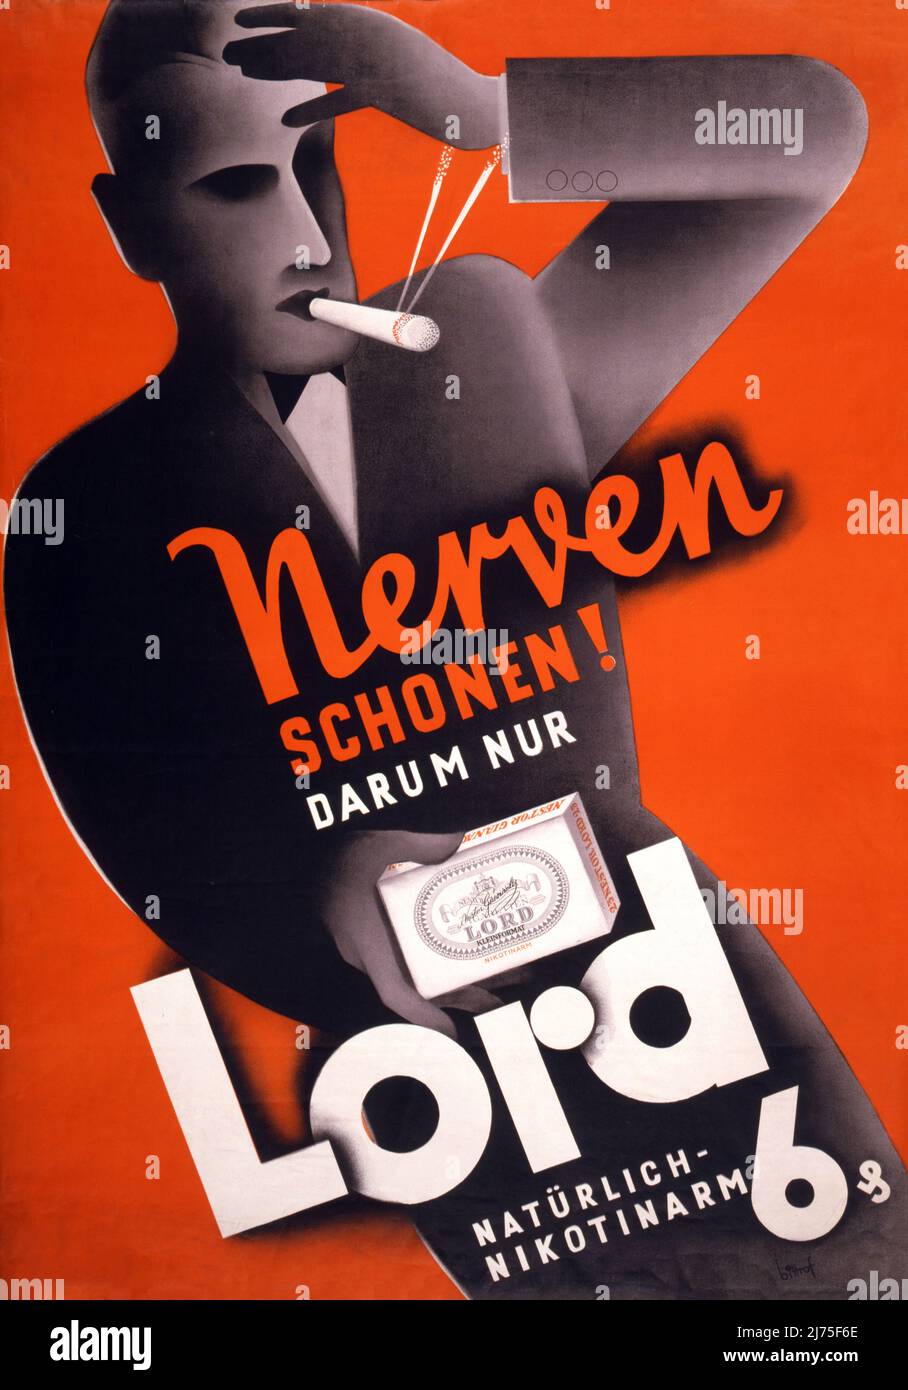 Nerven schonen! Darum nur Lord by Max Bittrof (1890-1972). Poster published ca. 1930 in Germany. Stock Photo